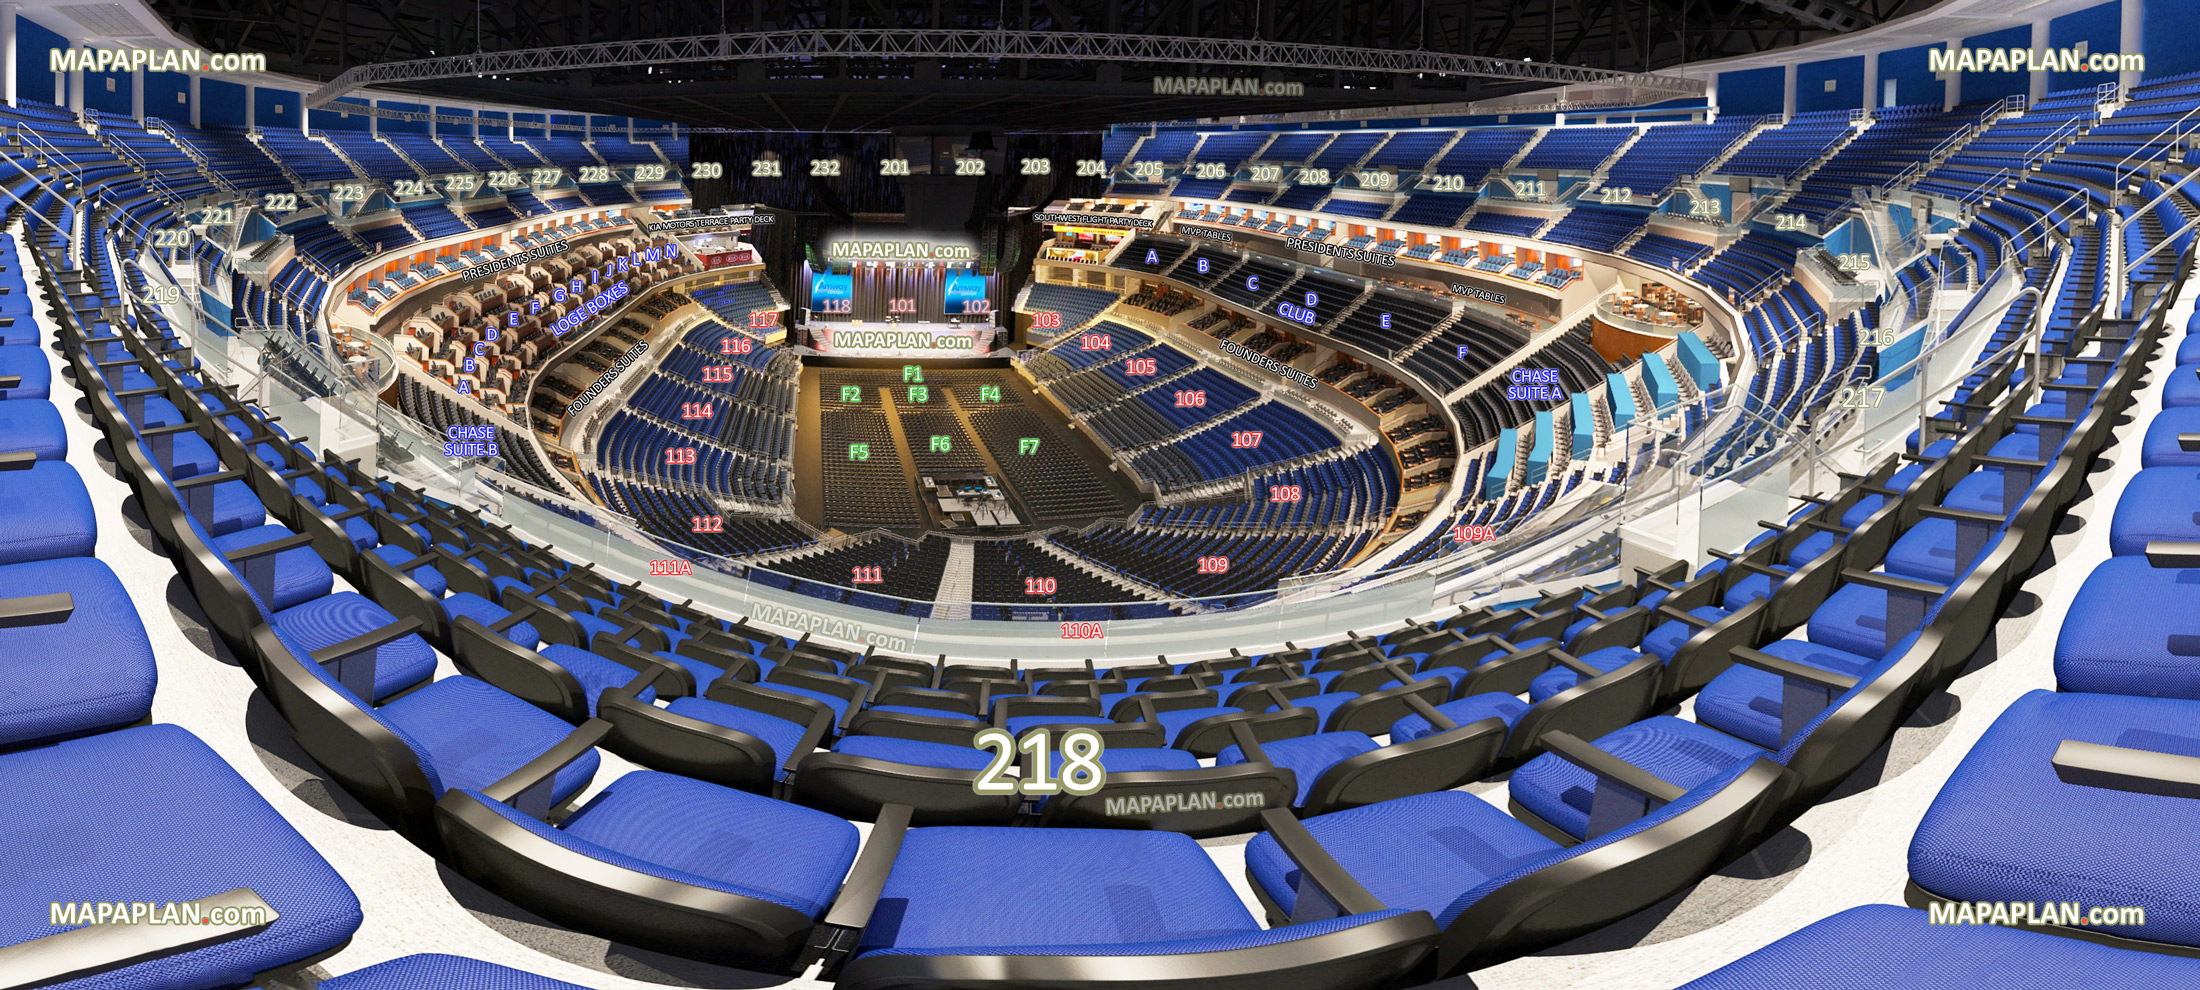 view section 218 row 12 seat 12 virtual interactive 3d behind stage interior tour inside picture general admission ga Orlando Amway Center seating chart